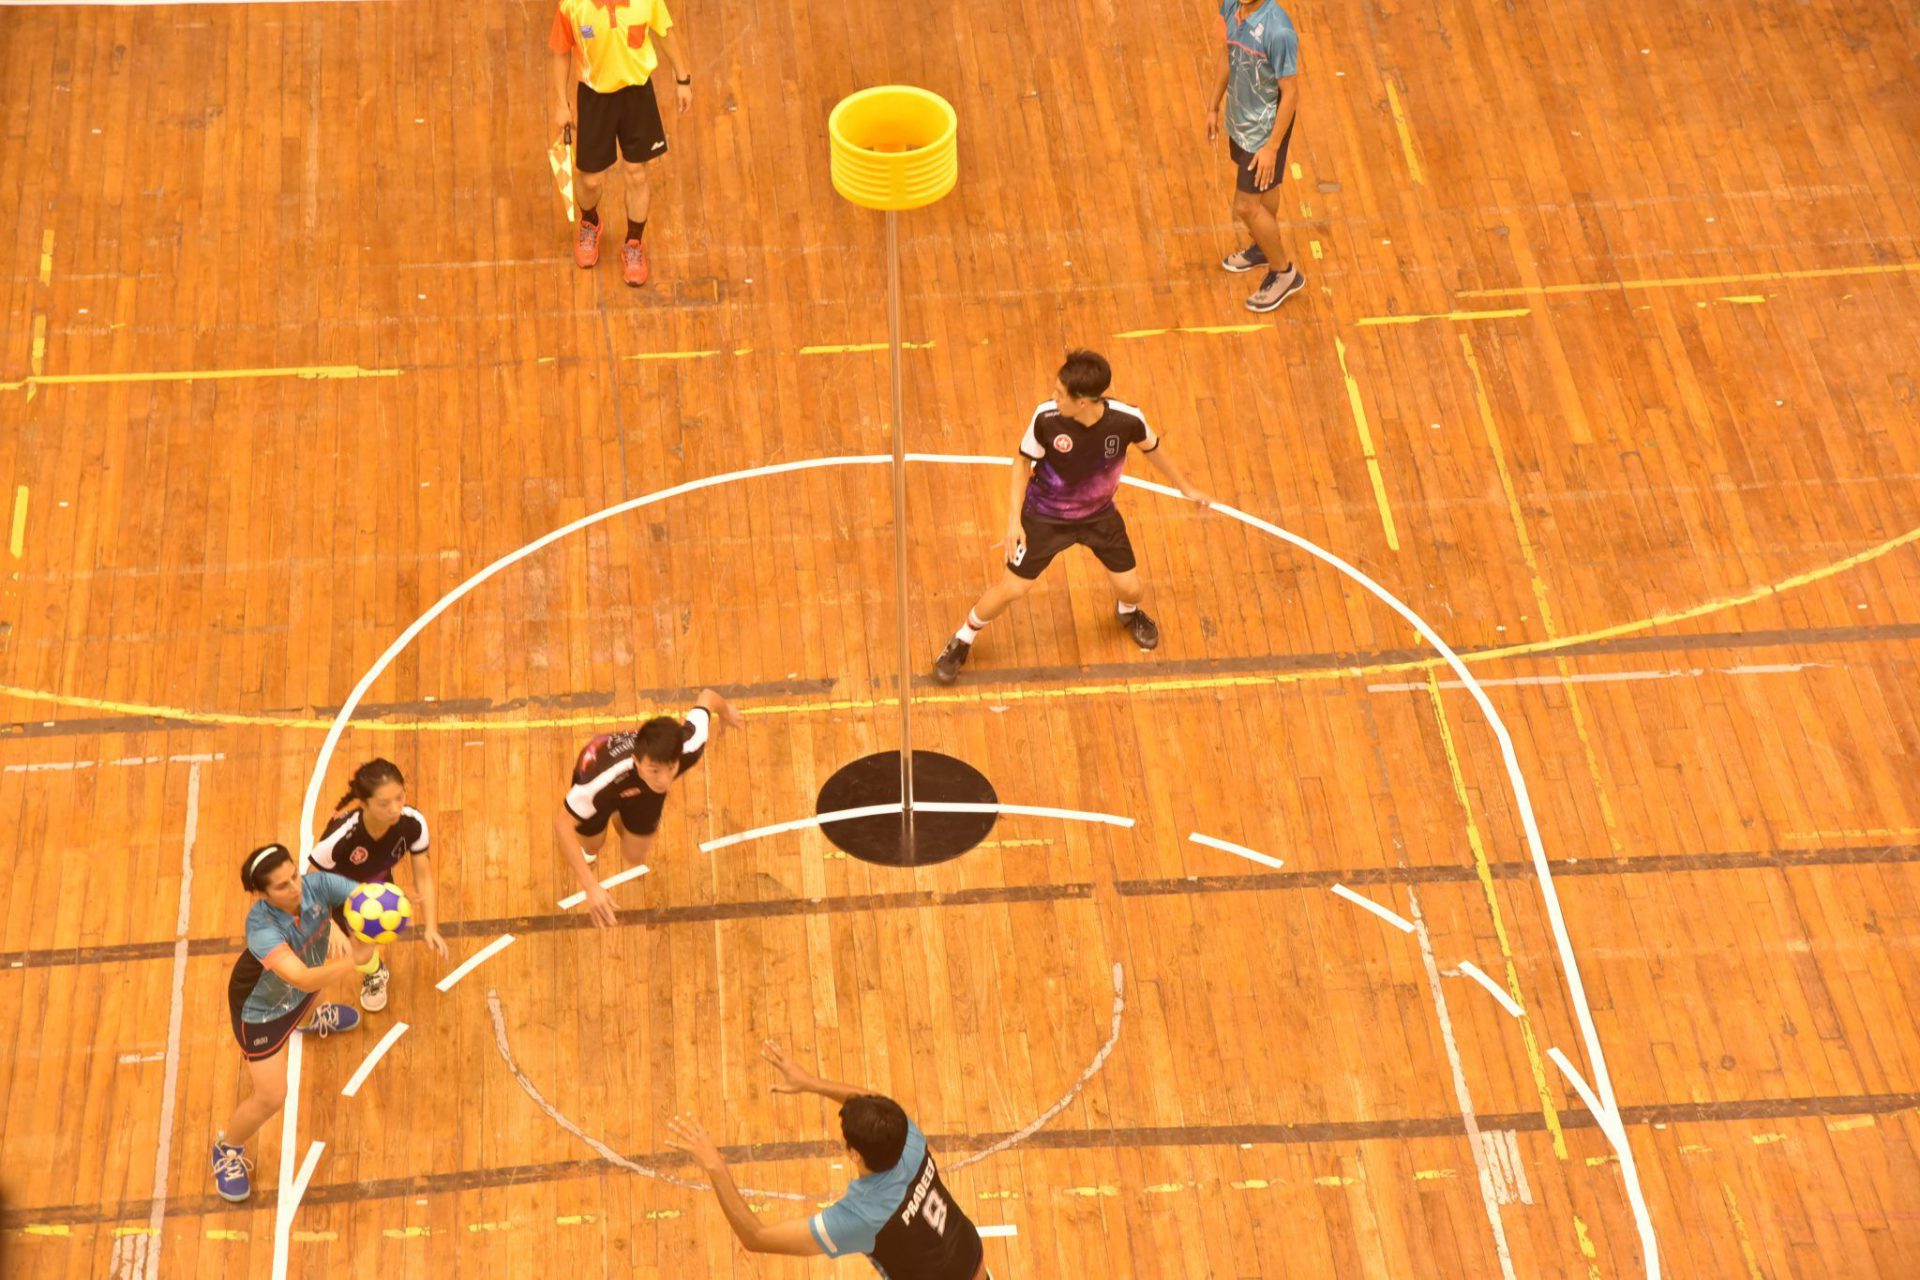 4th IKF Asia Korfball Championship Day 3 Report (results